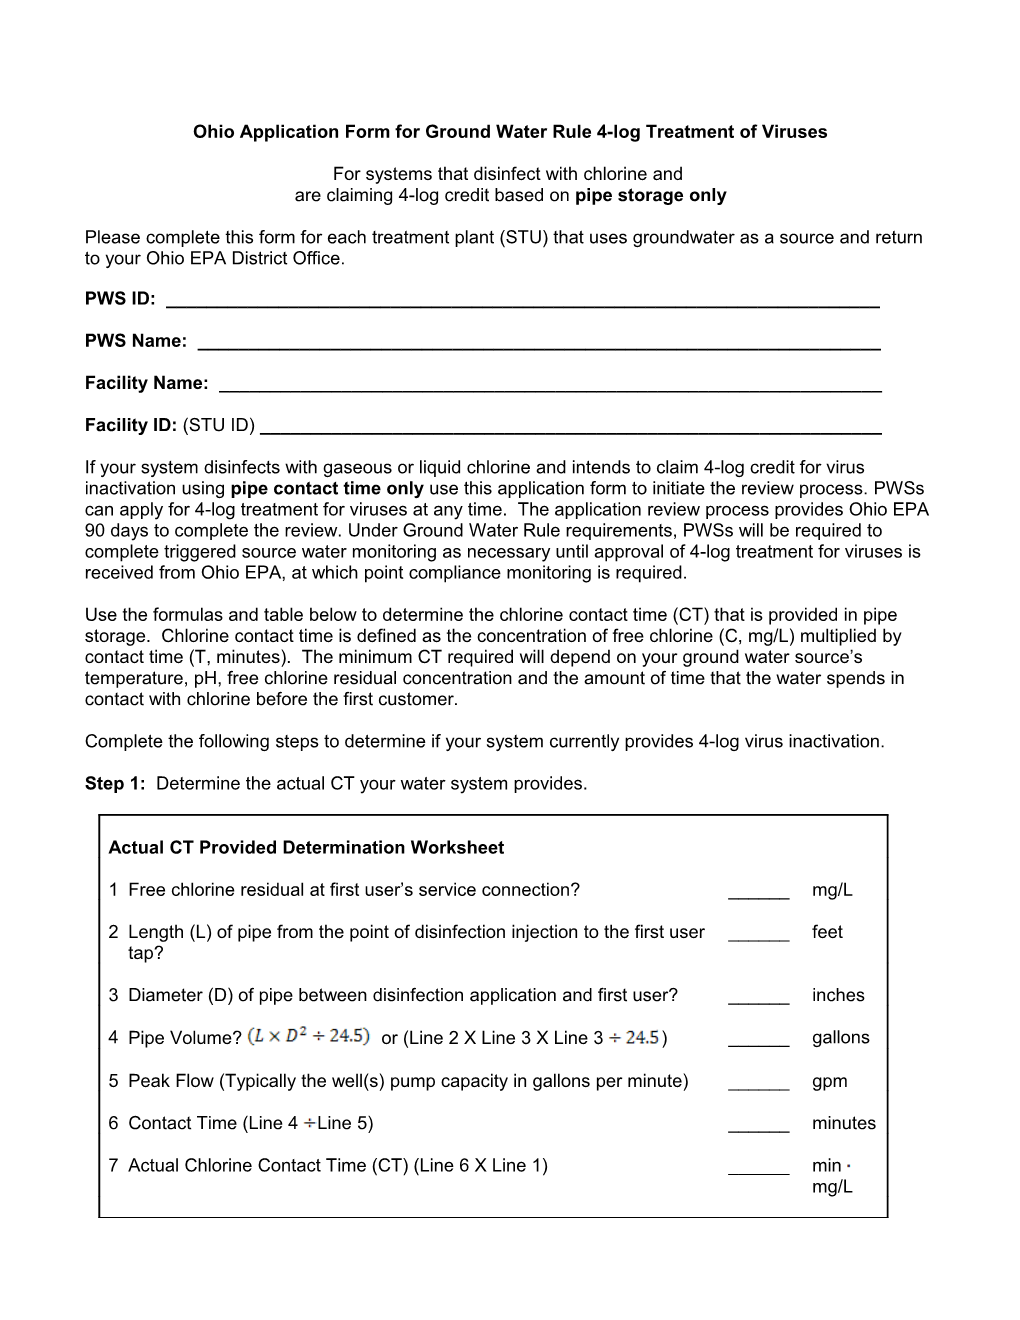 Ohio Application Form for Ground Water Rule 4-Log Treatment of Viruses